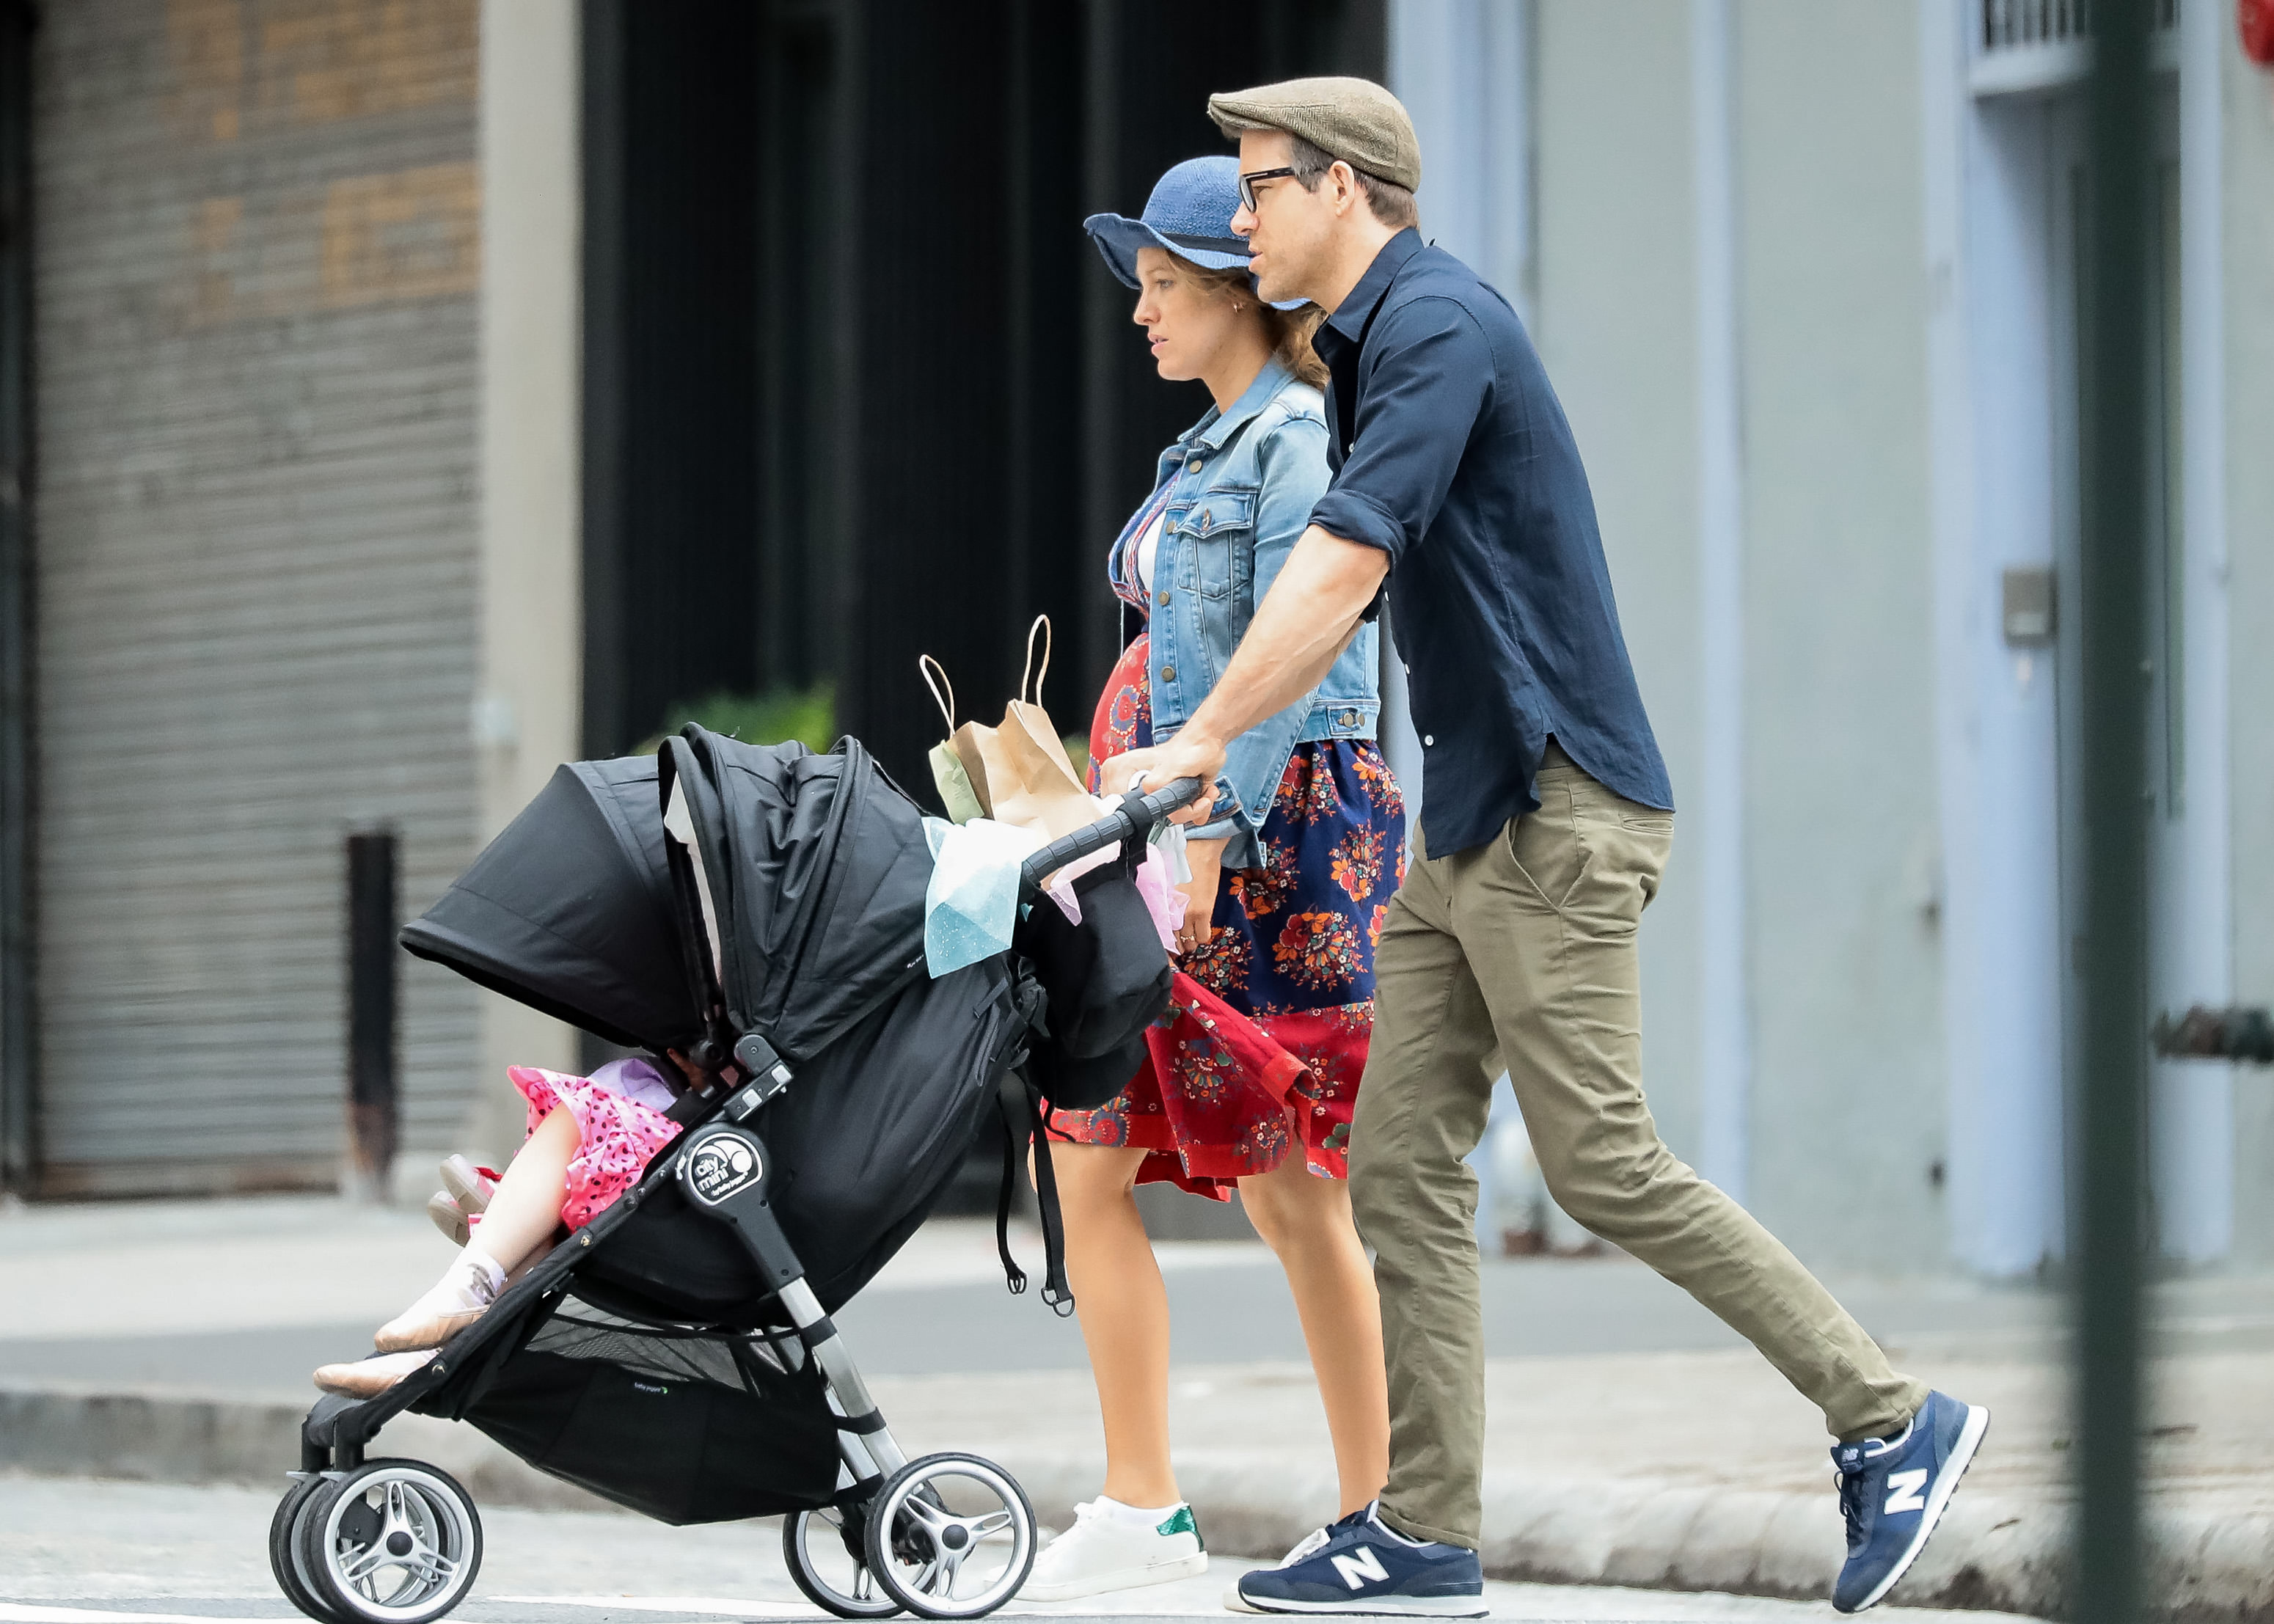 Blake Lively, Ryan Reynolds and their daughters in New York City